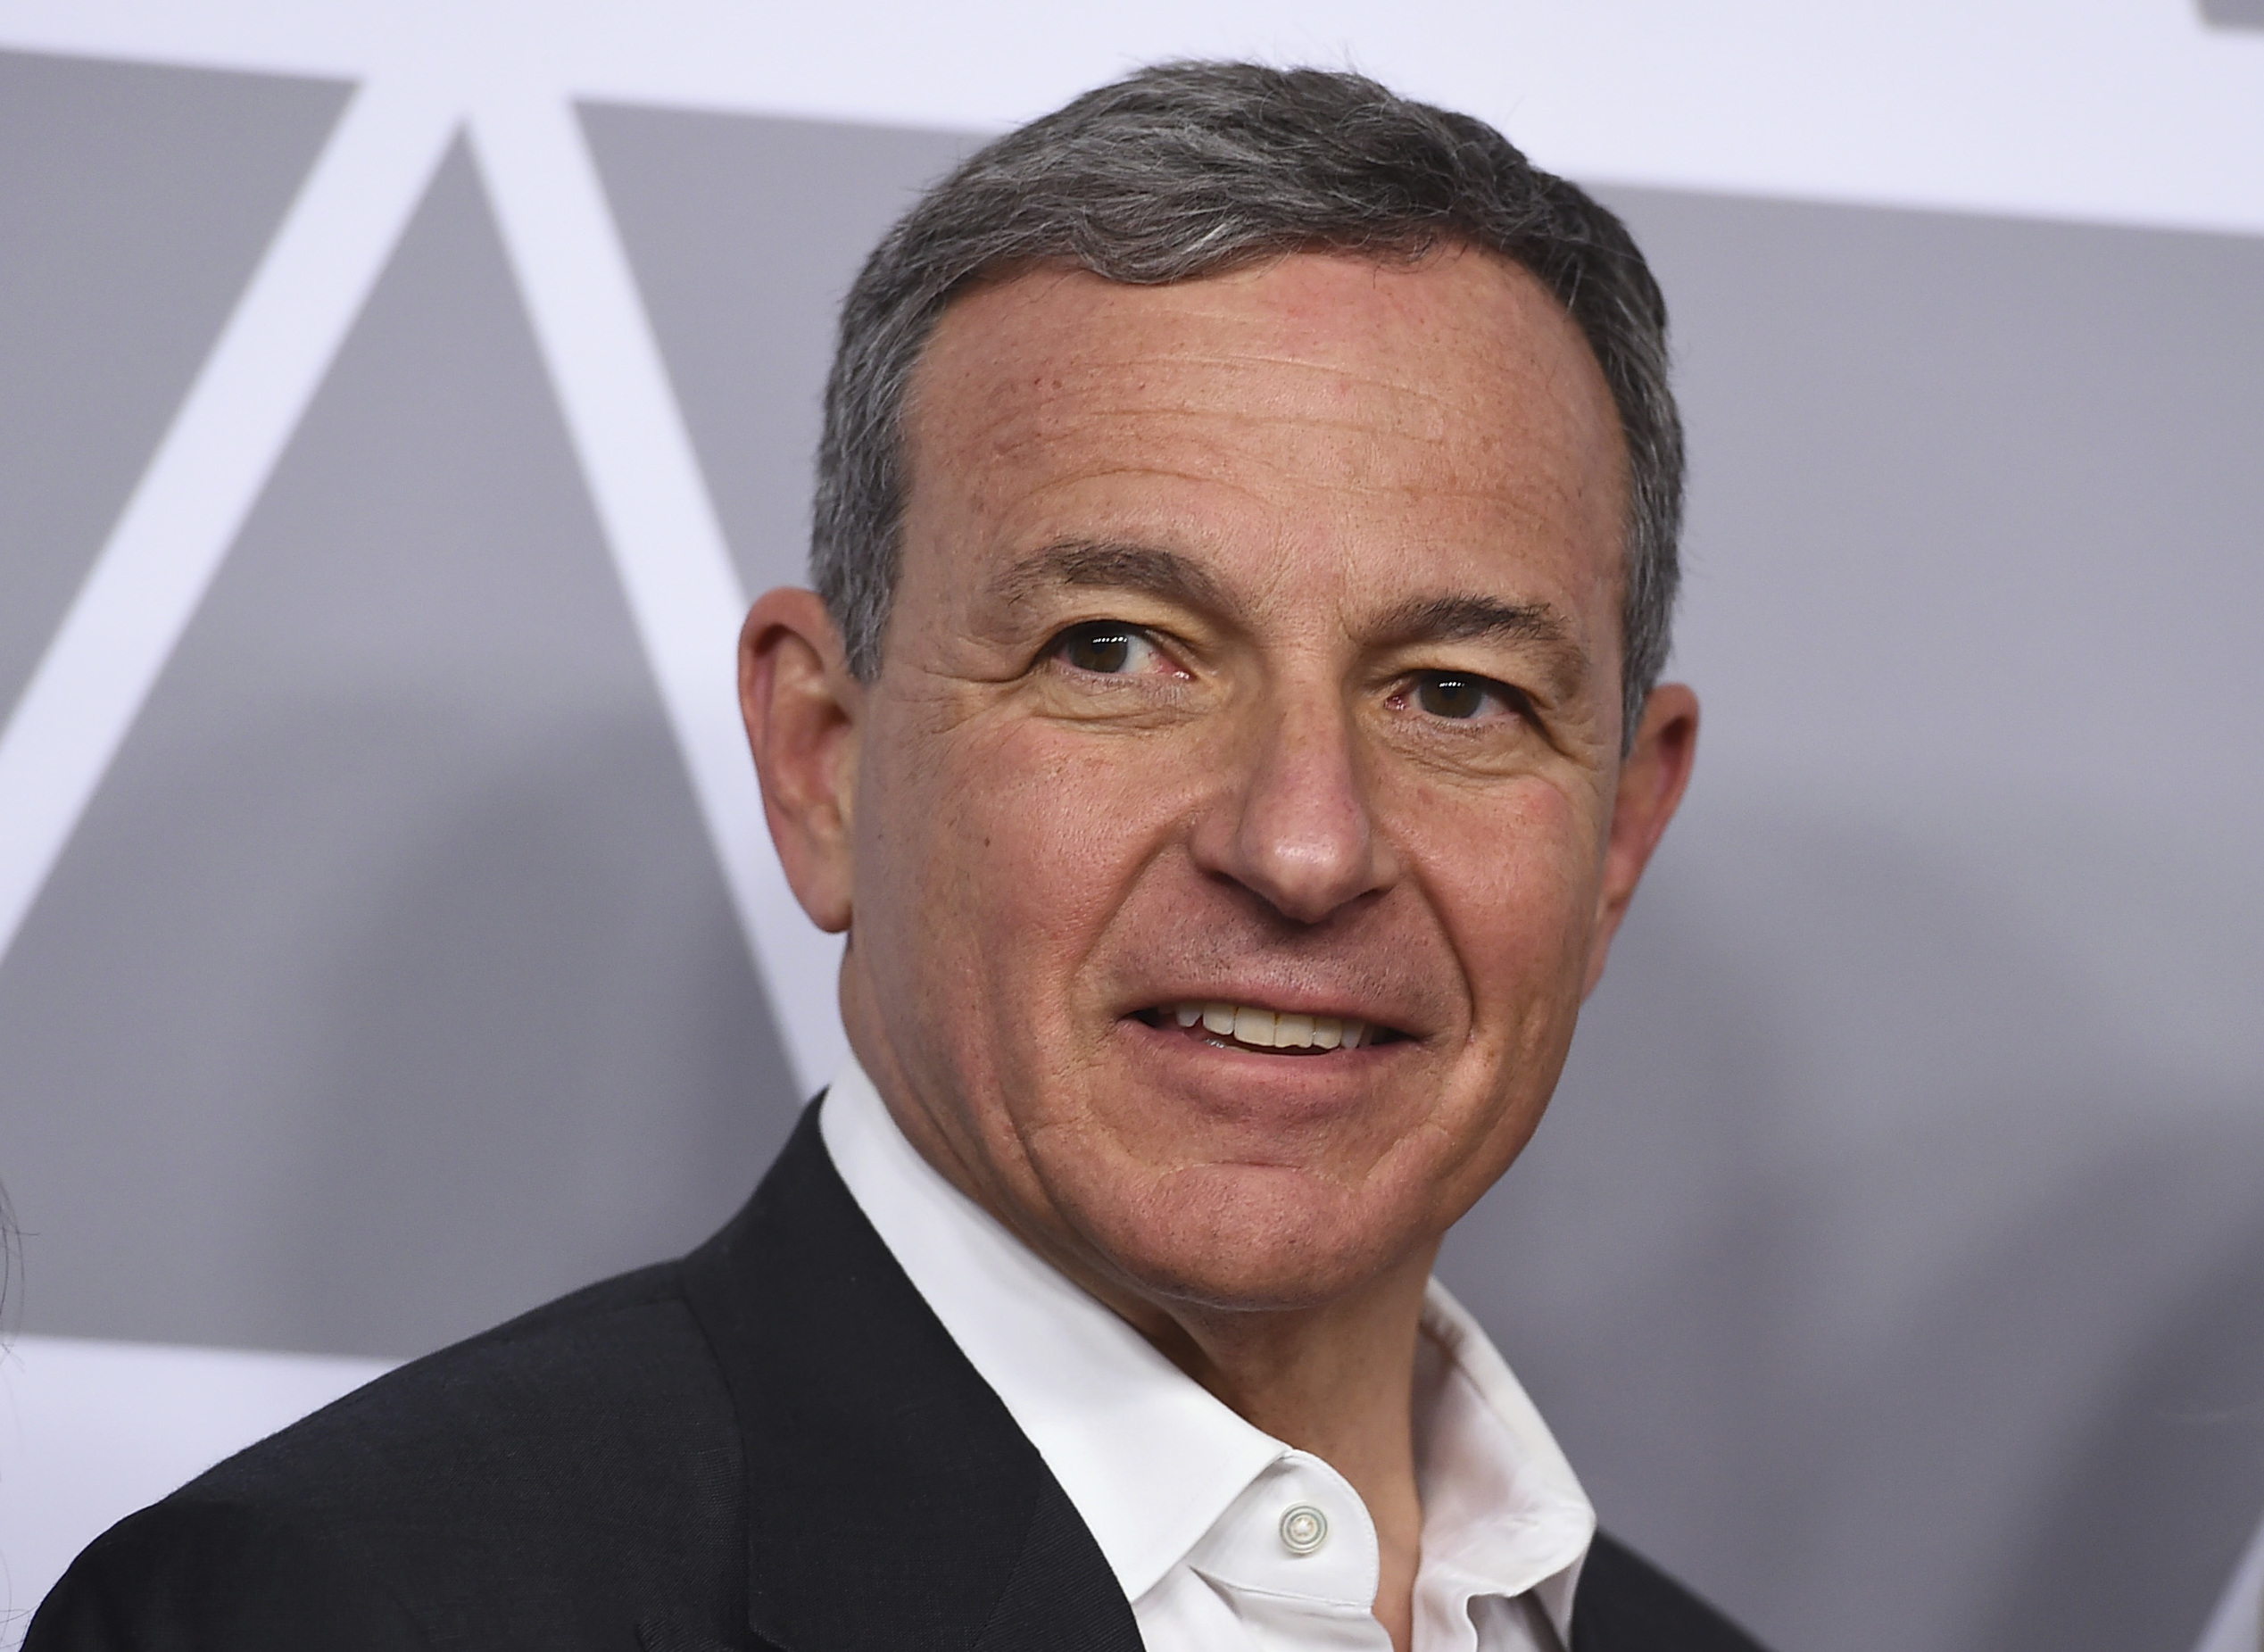 Bob Iger arrives at the 90th Academy Awards Nominees Luncheon at The Beverly Hilton hotel, in Beverly Hills, Calif90th Academy Awards Nominees Luncheon - Arrivals, Beverly Hills, USA - 05 Feb 2018